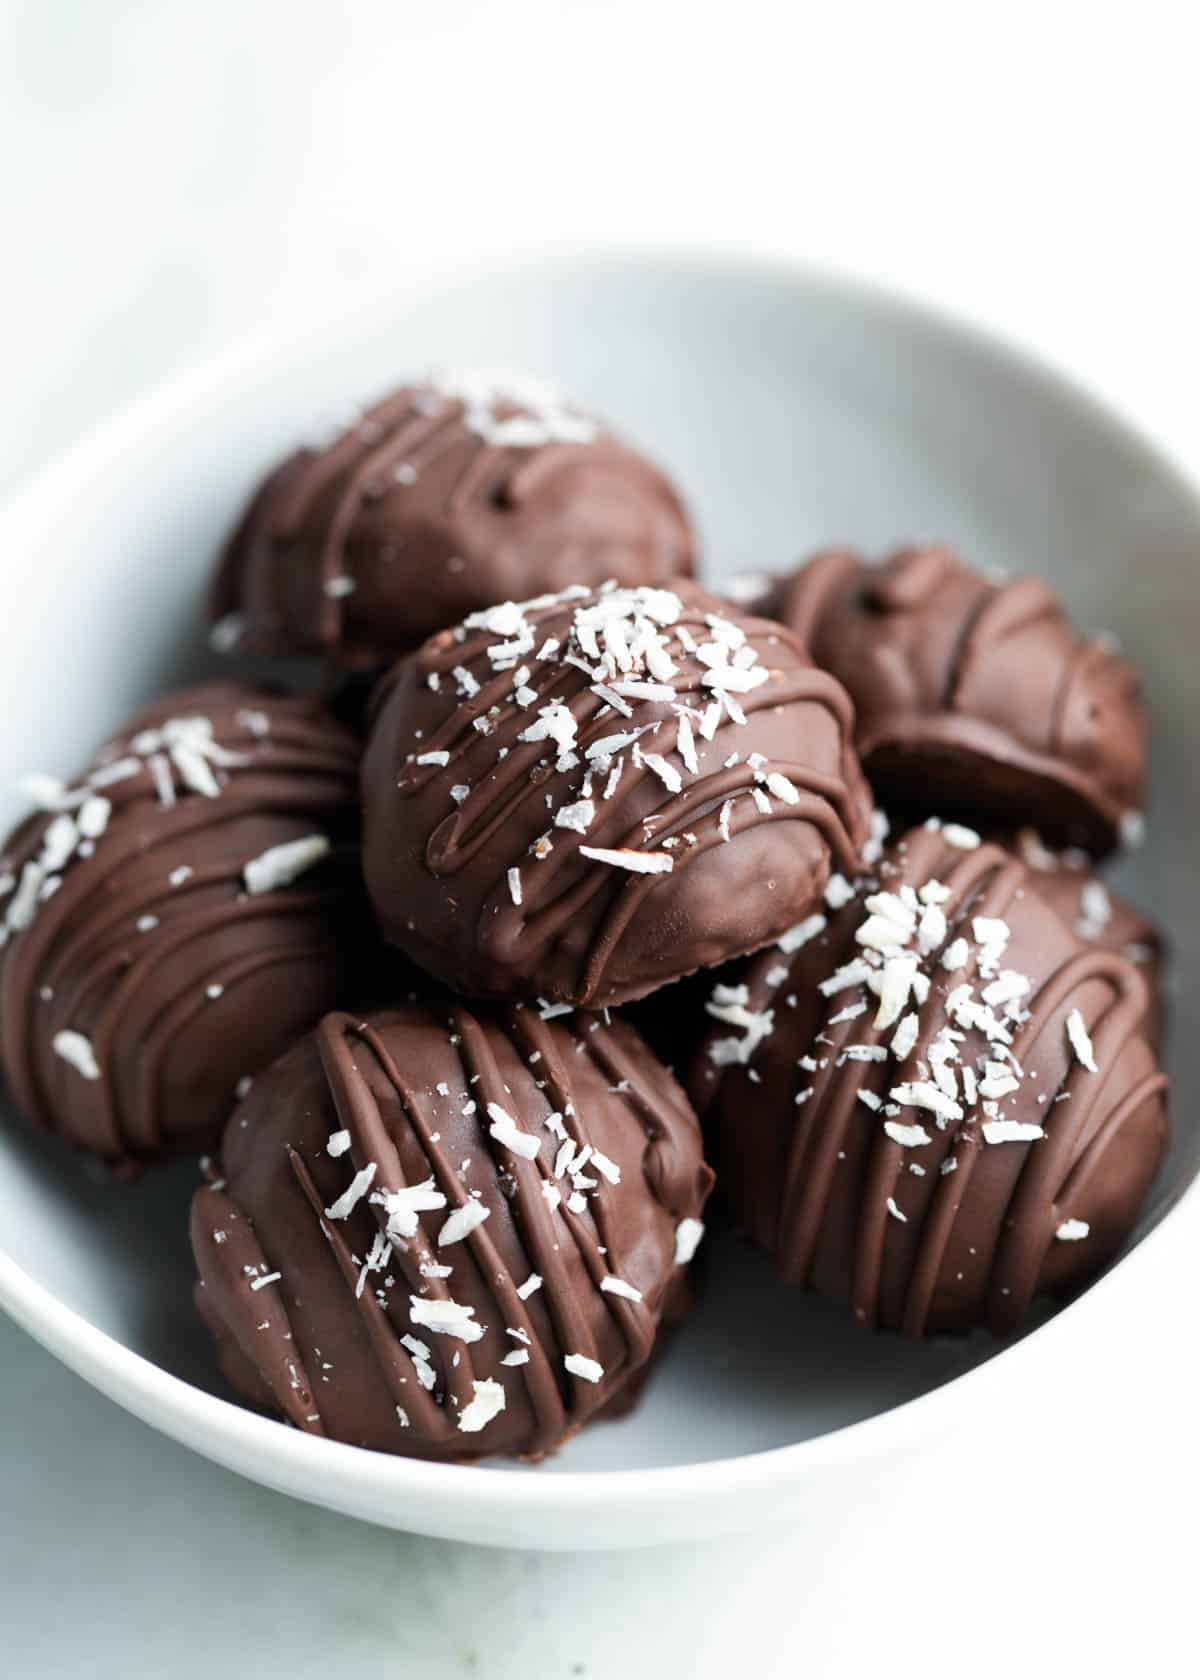 Chocolate coconut balls in a bowl.